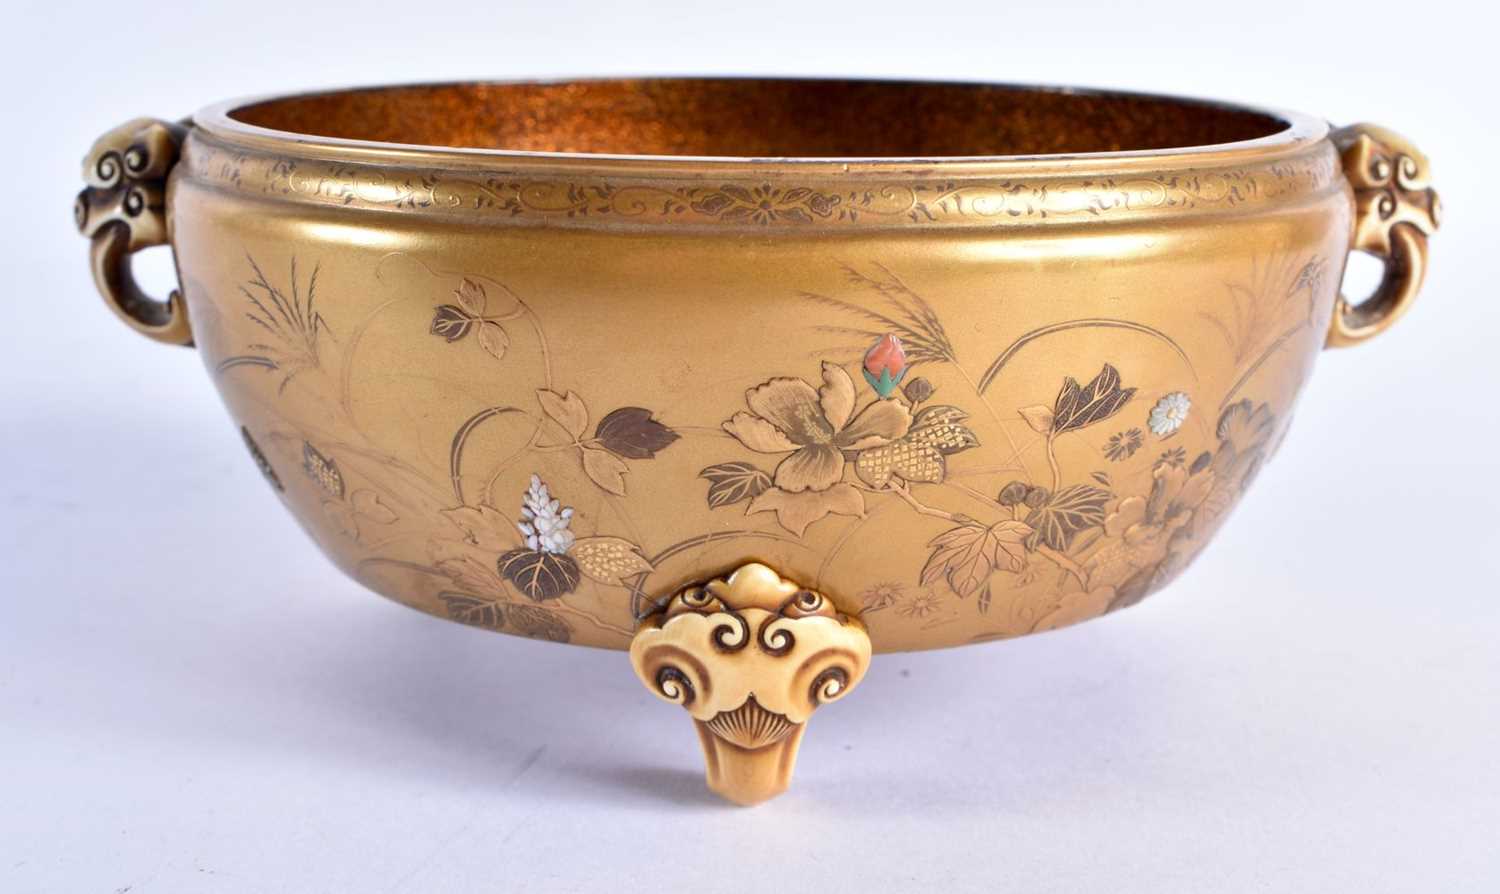 A 19TH CENTURY JAPANESE MEIJI PERIOD GOLD LACQUER SHIBAYAMA INLAID CIRCULAR CENSER decorated with